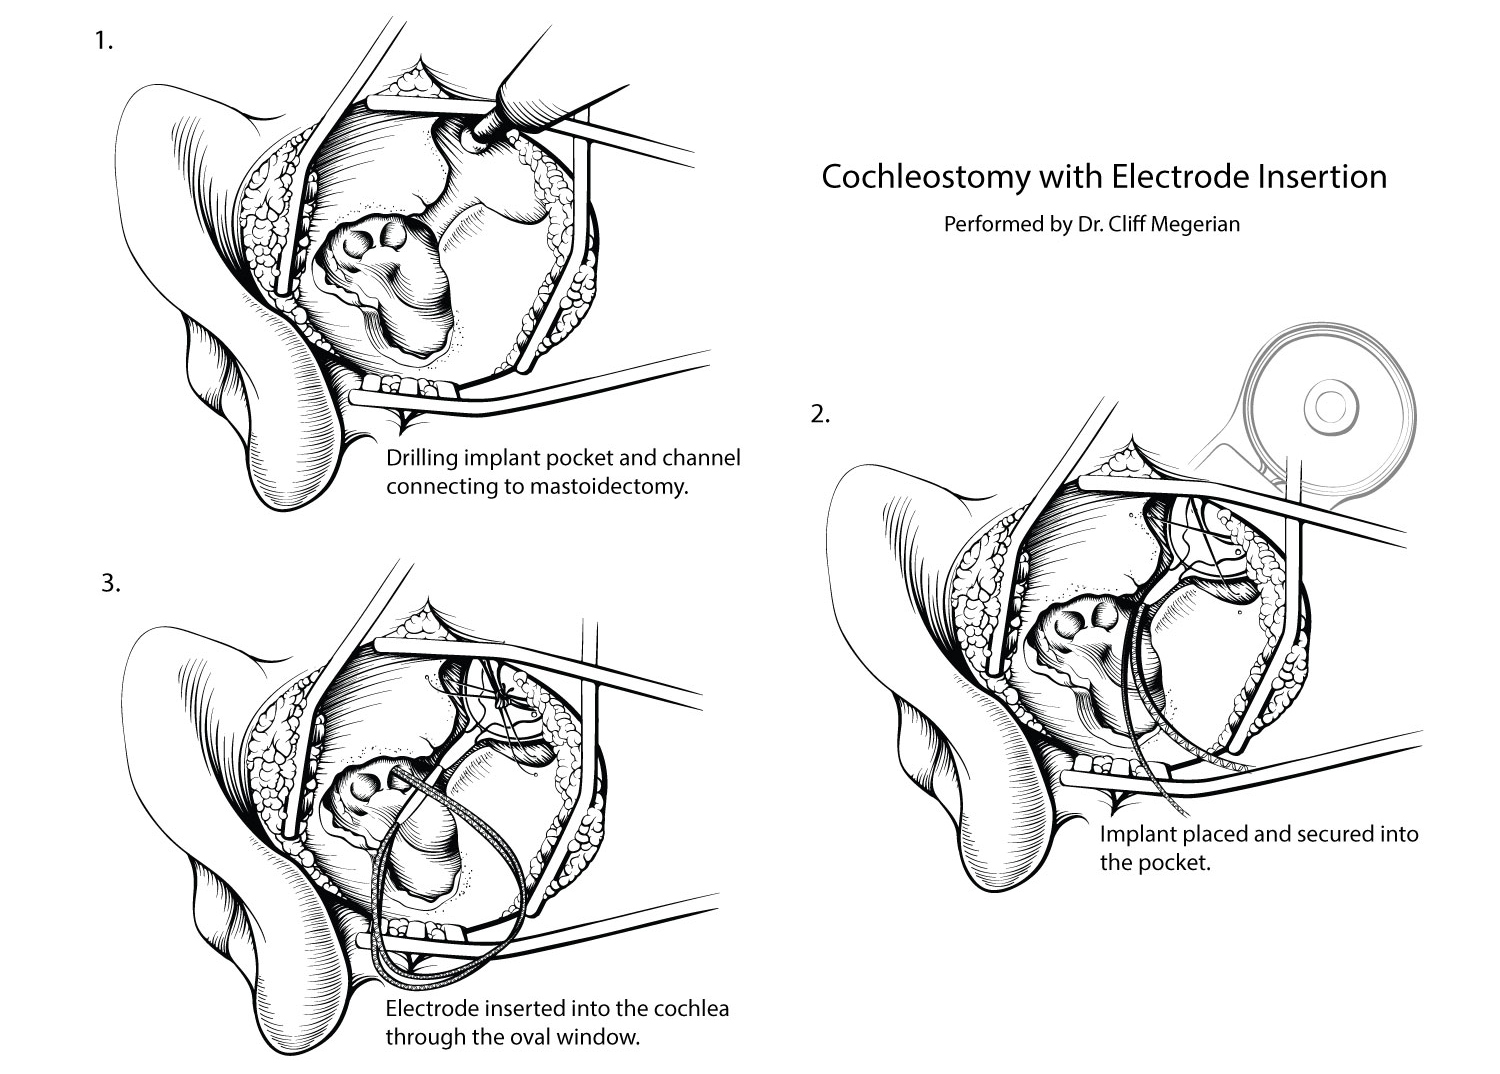 Cochleostomy with Electrode Insertion. April 2010.